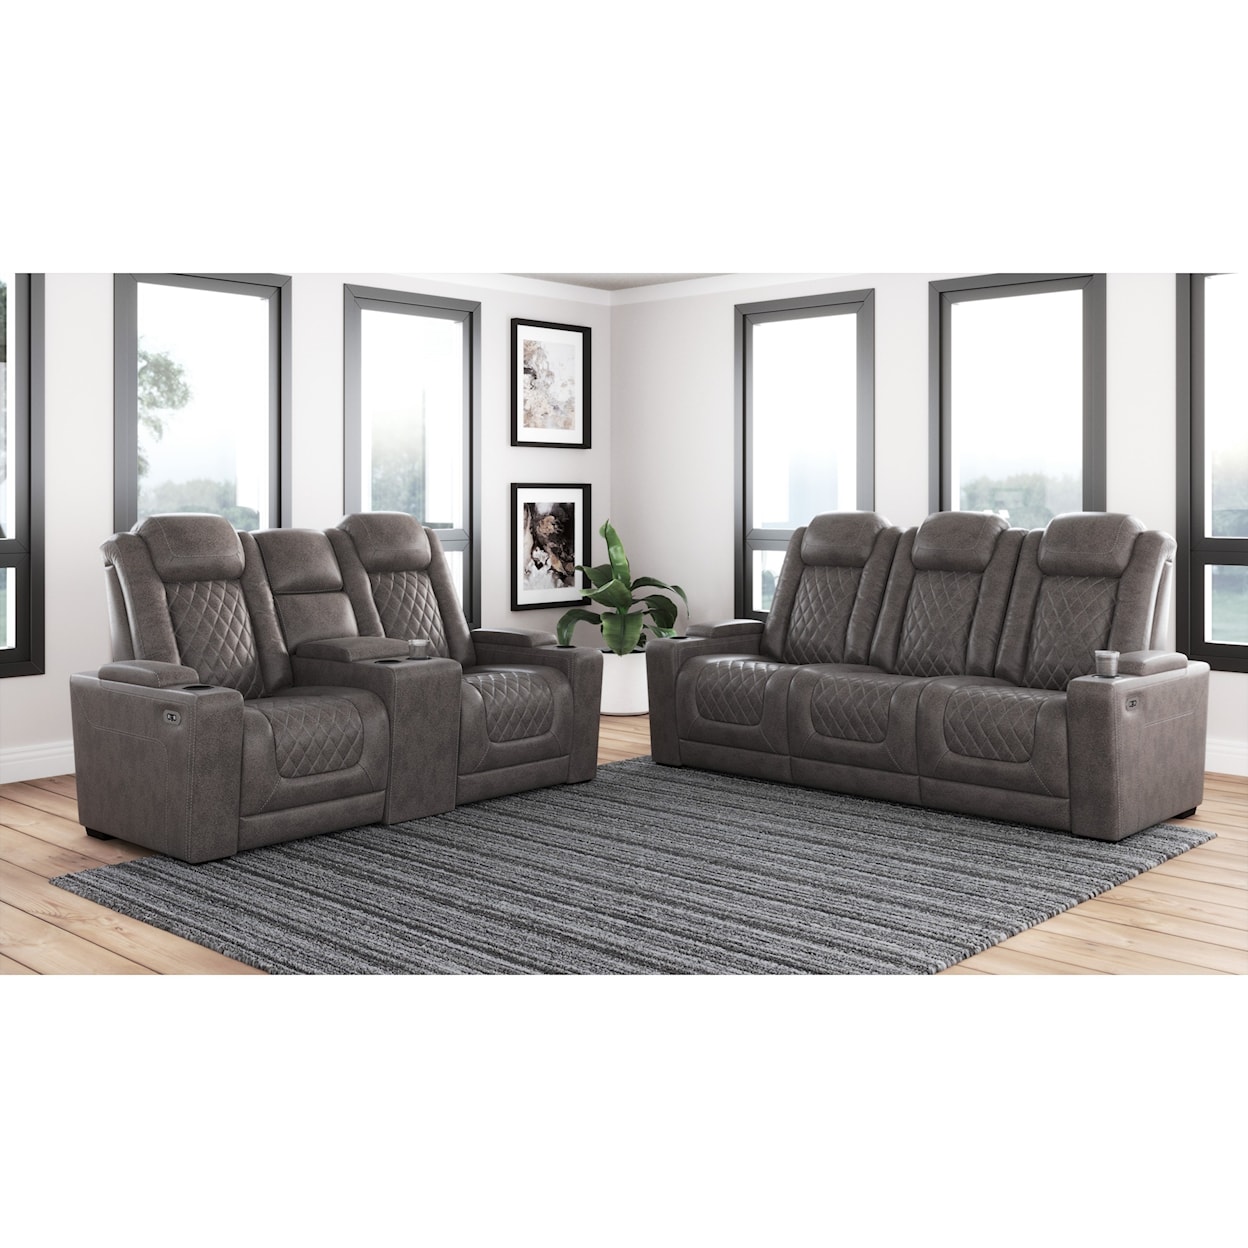 Signature Design by Ashley Hyllmont Power Reclining Living Room Group